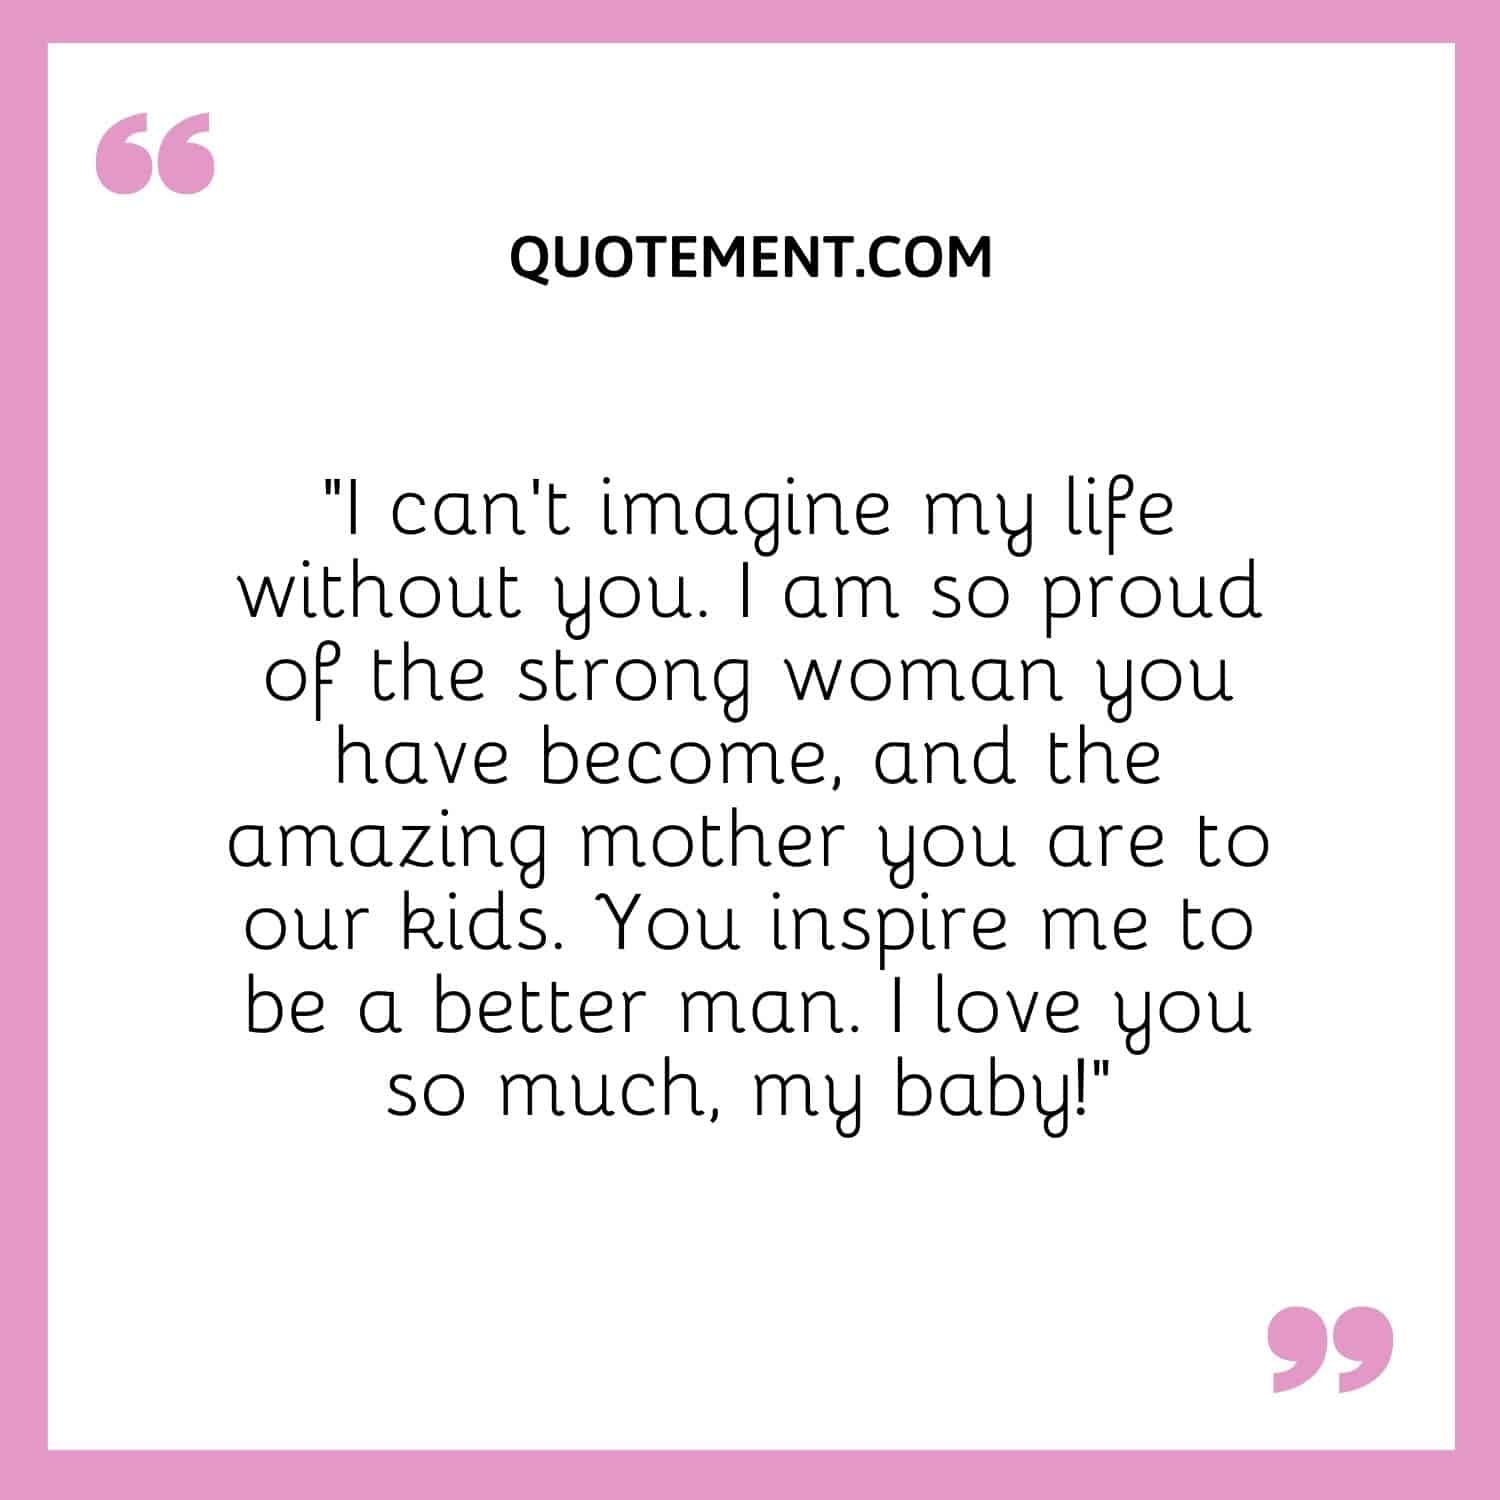 “I can’t imagine my life without you. I am so proud of the strong woman you have become, and the amazing mother you are to our kids.